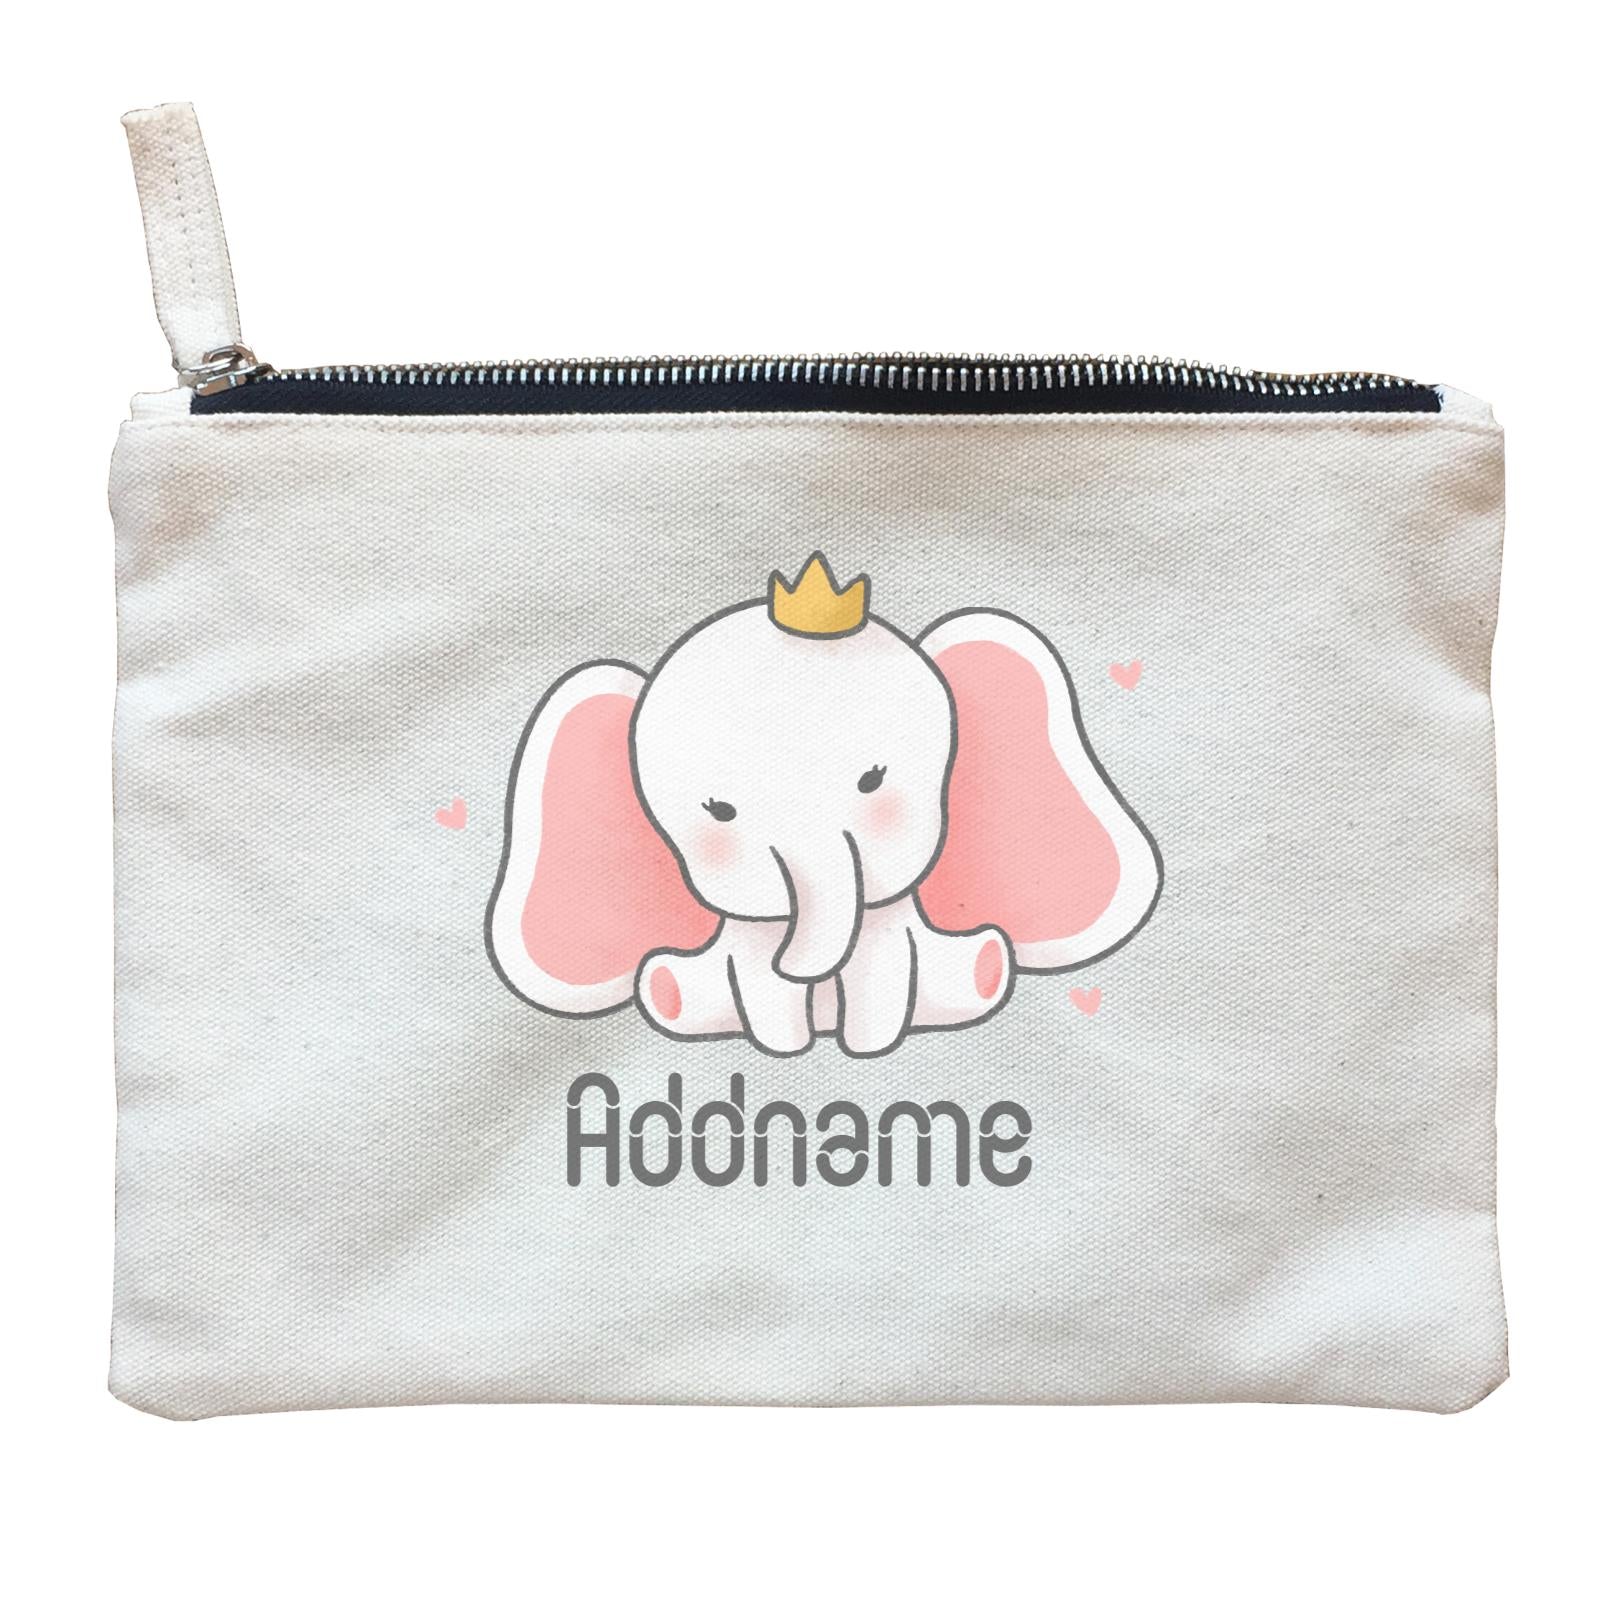 Cute Hand Drawn Style Baby Elephant with Crown Addname Zipper Pouch